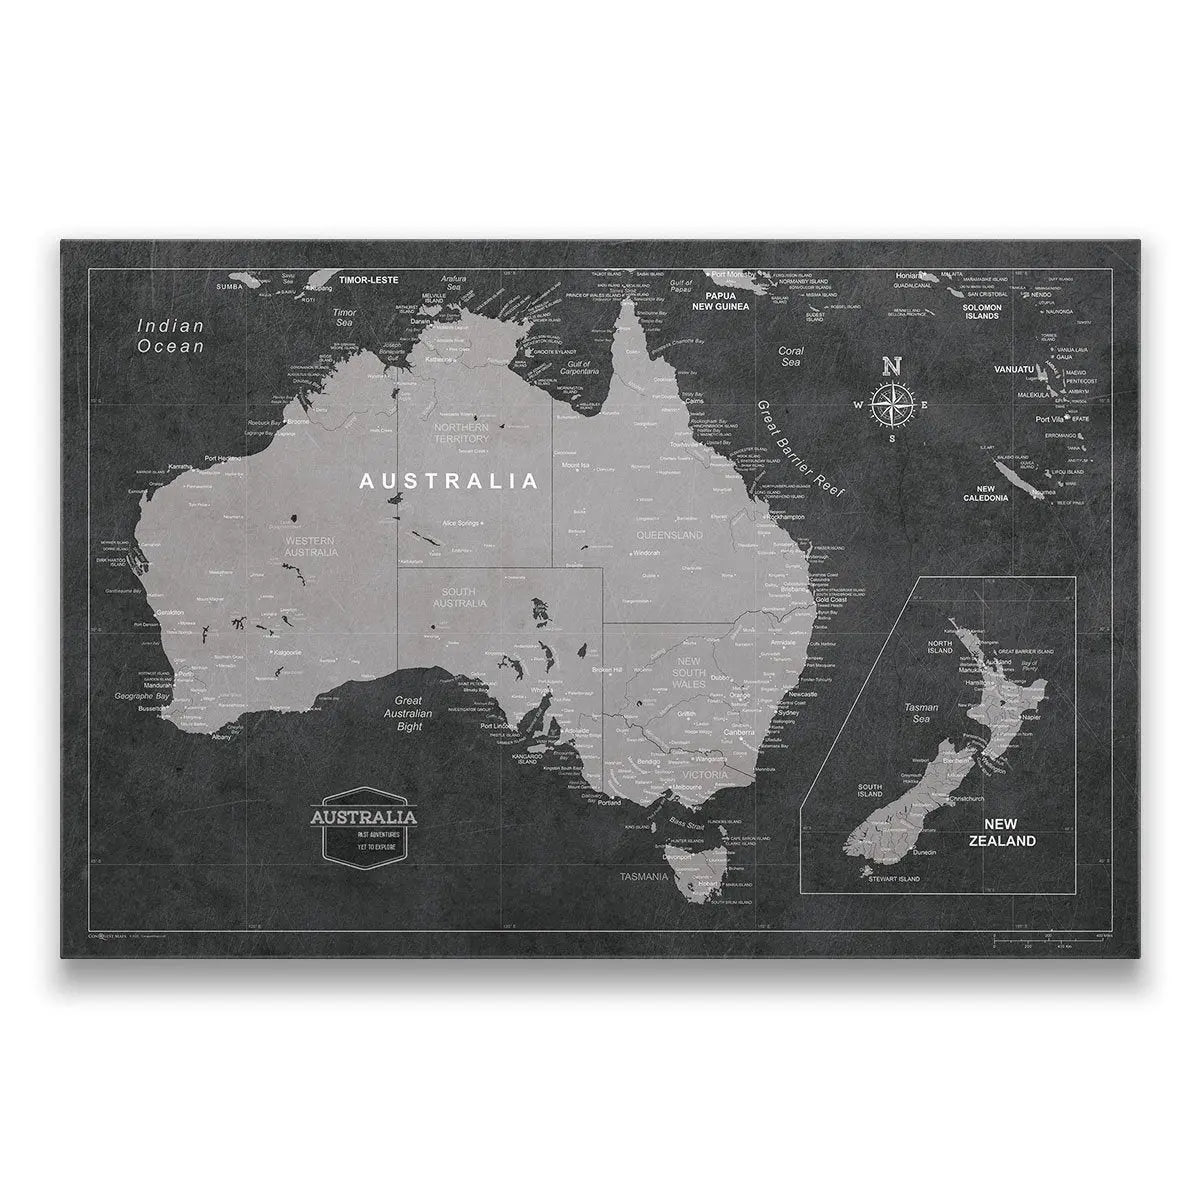 Australia Wall Map: Celebrate Your Travels